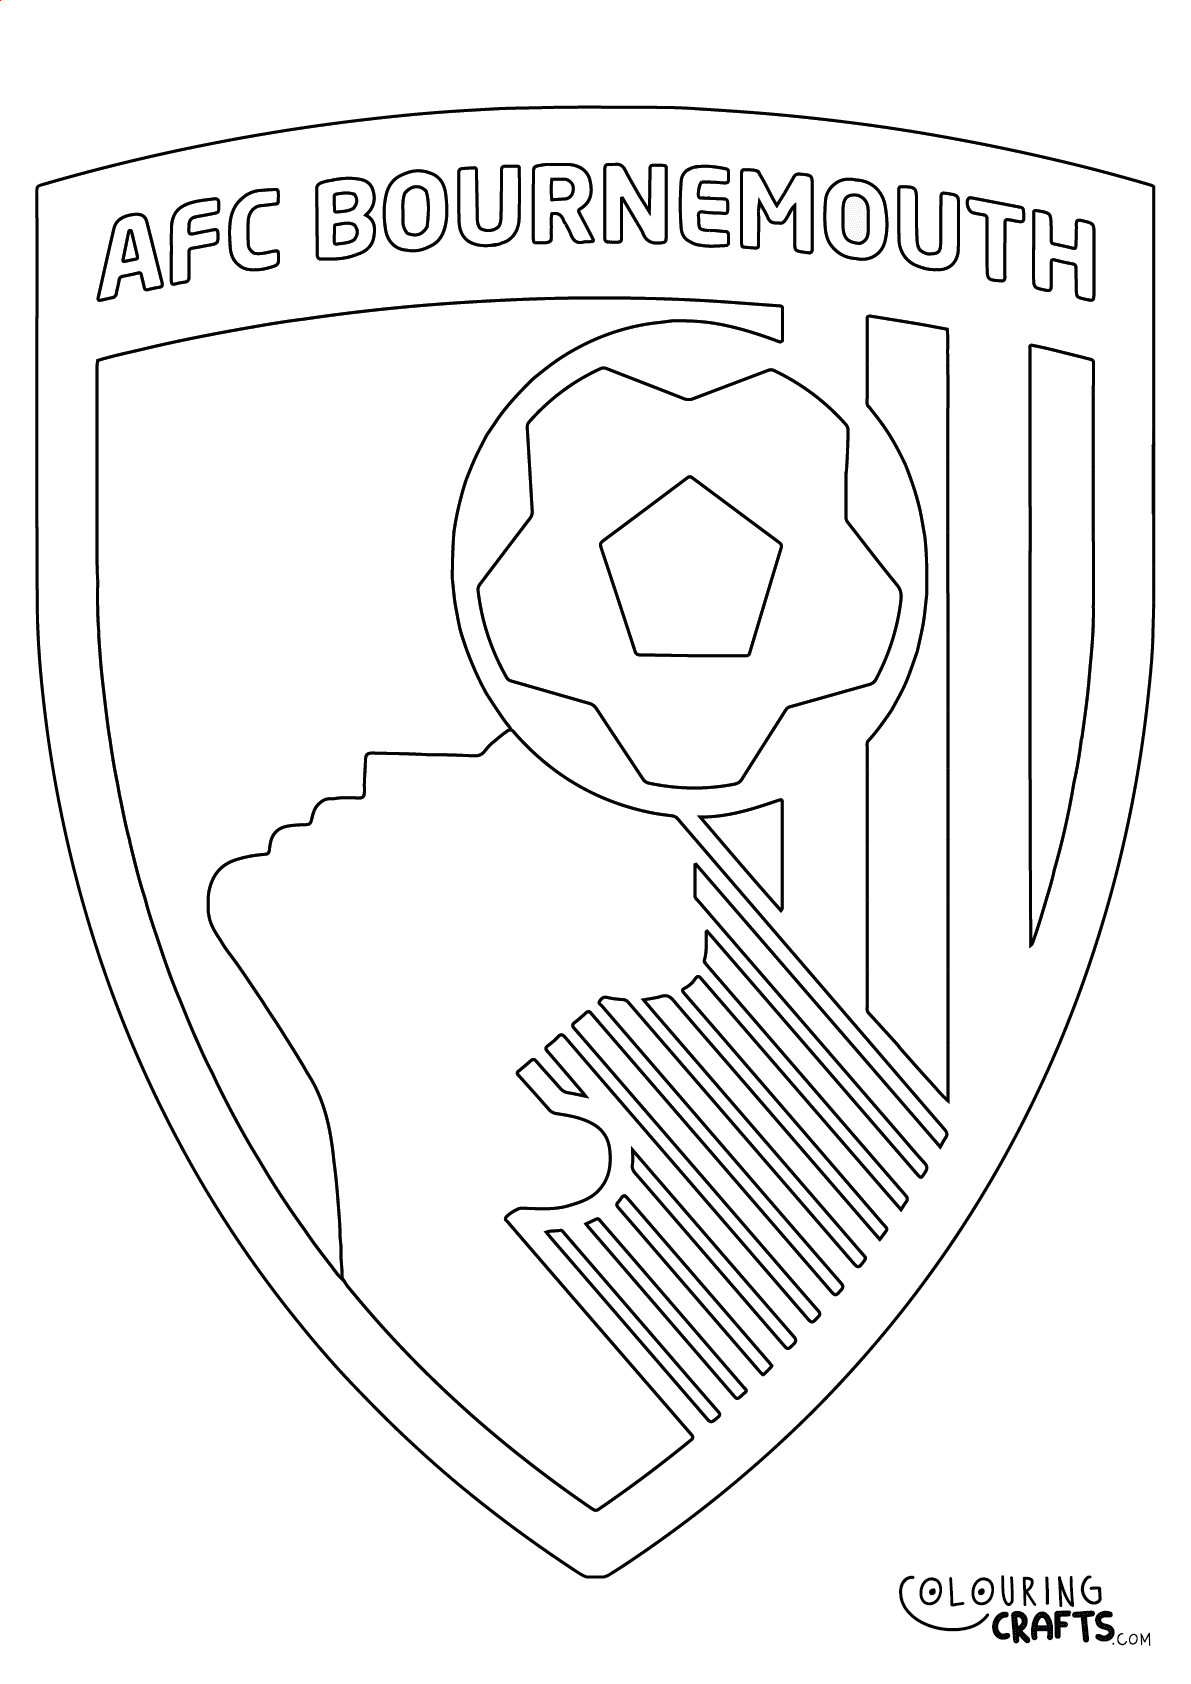 AFC Bournemouth Badge Printable Colouring Page - Colouring Crafts